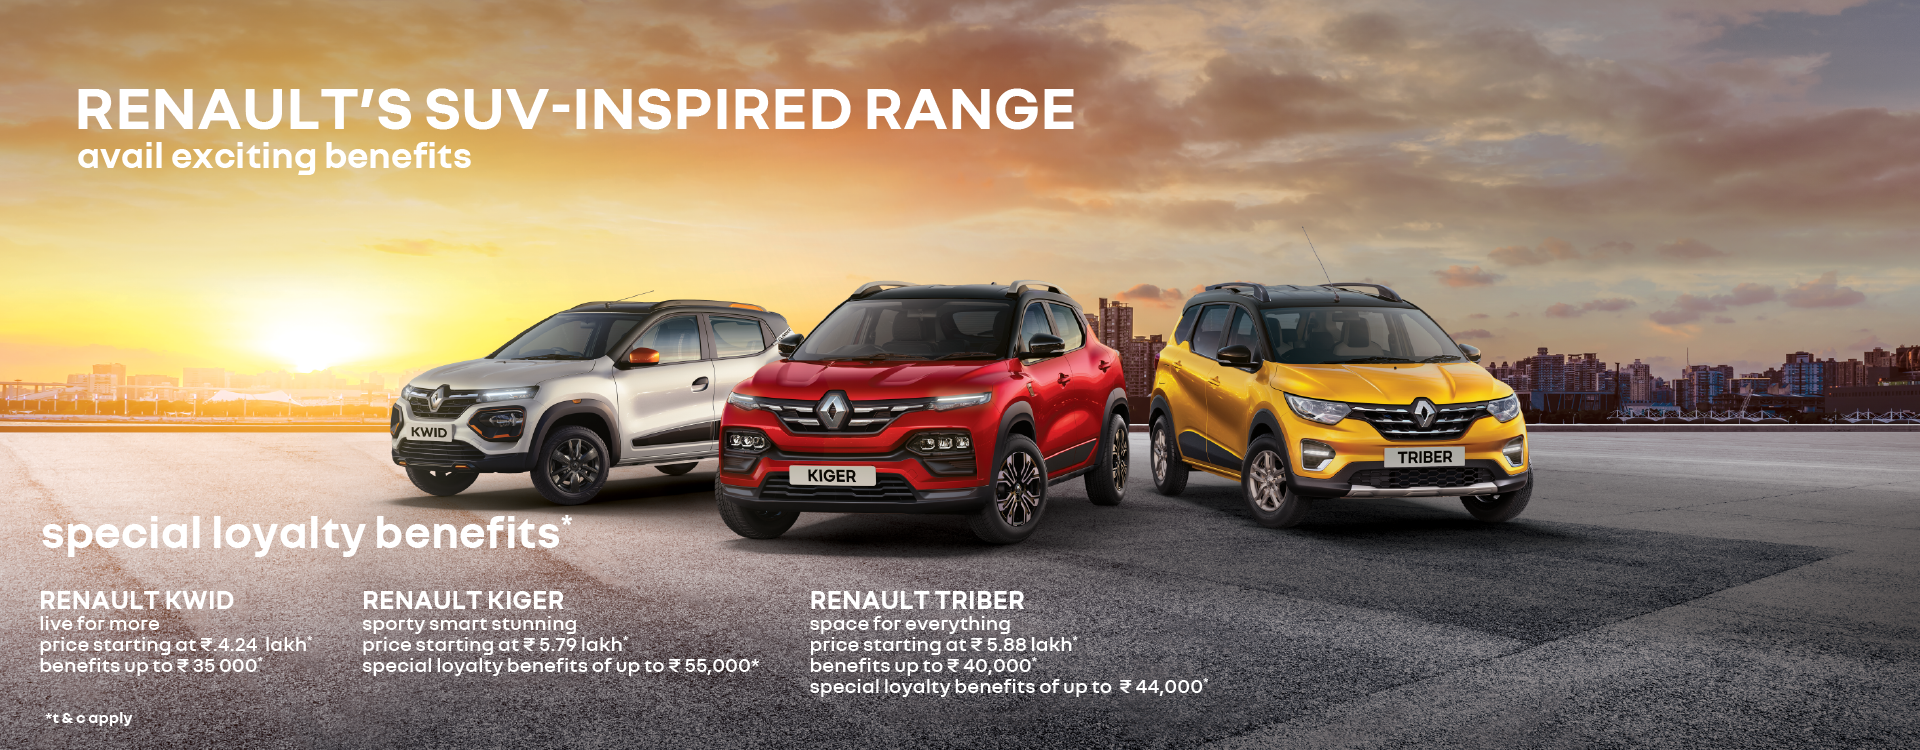 june offers trident renault